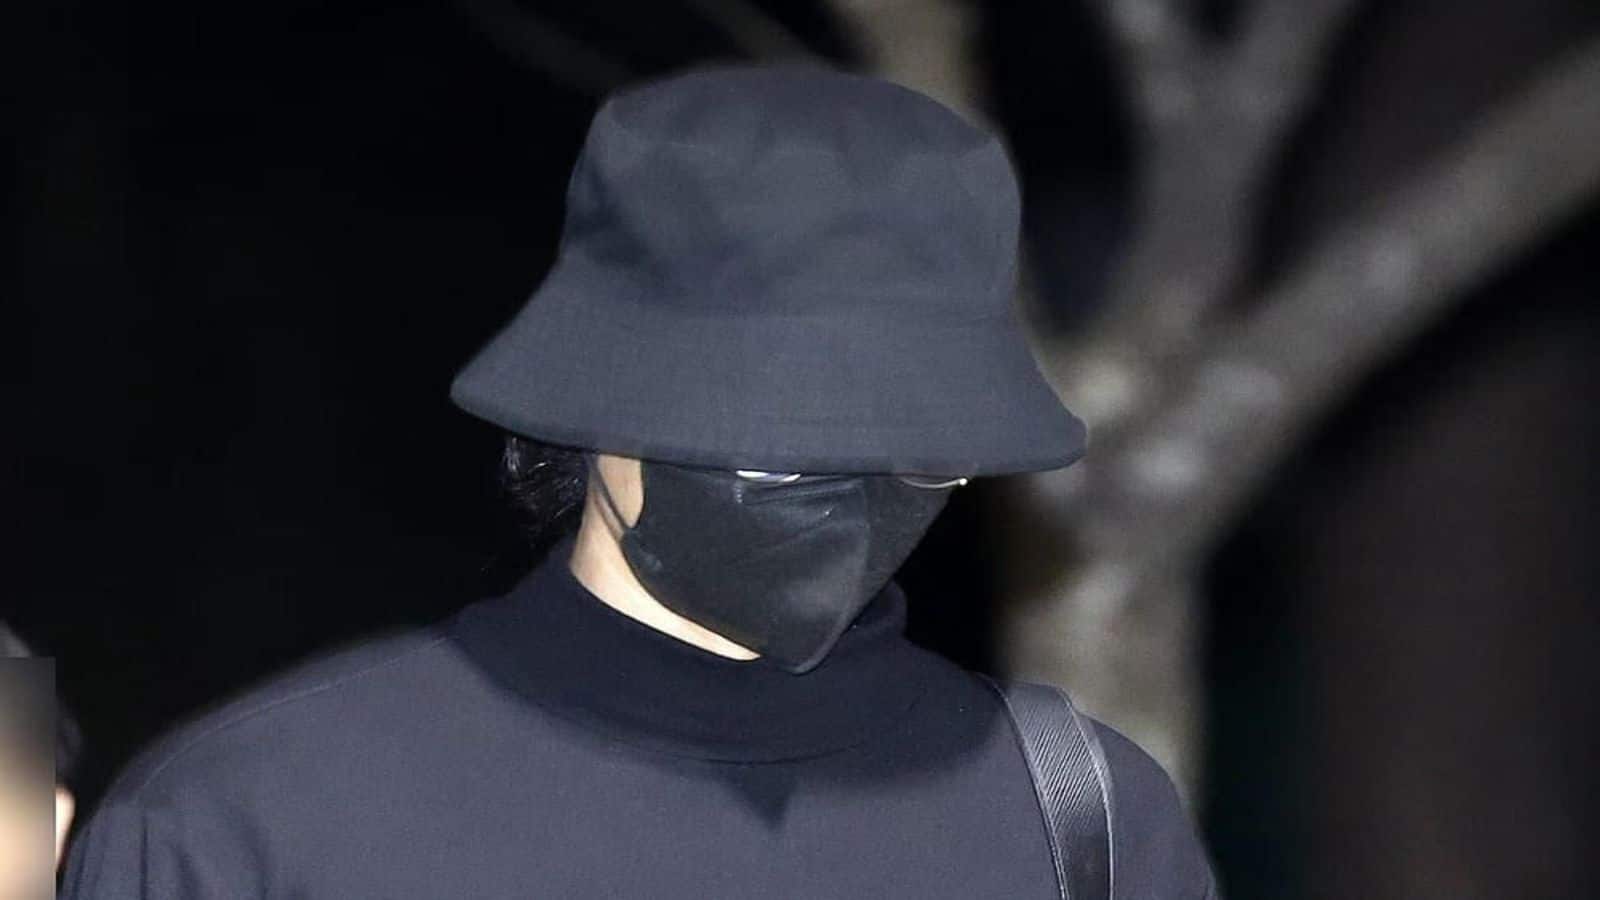 Sex video scandal convict Jung Joon-young released from prison